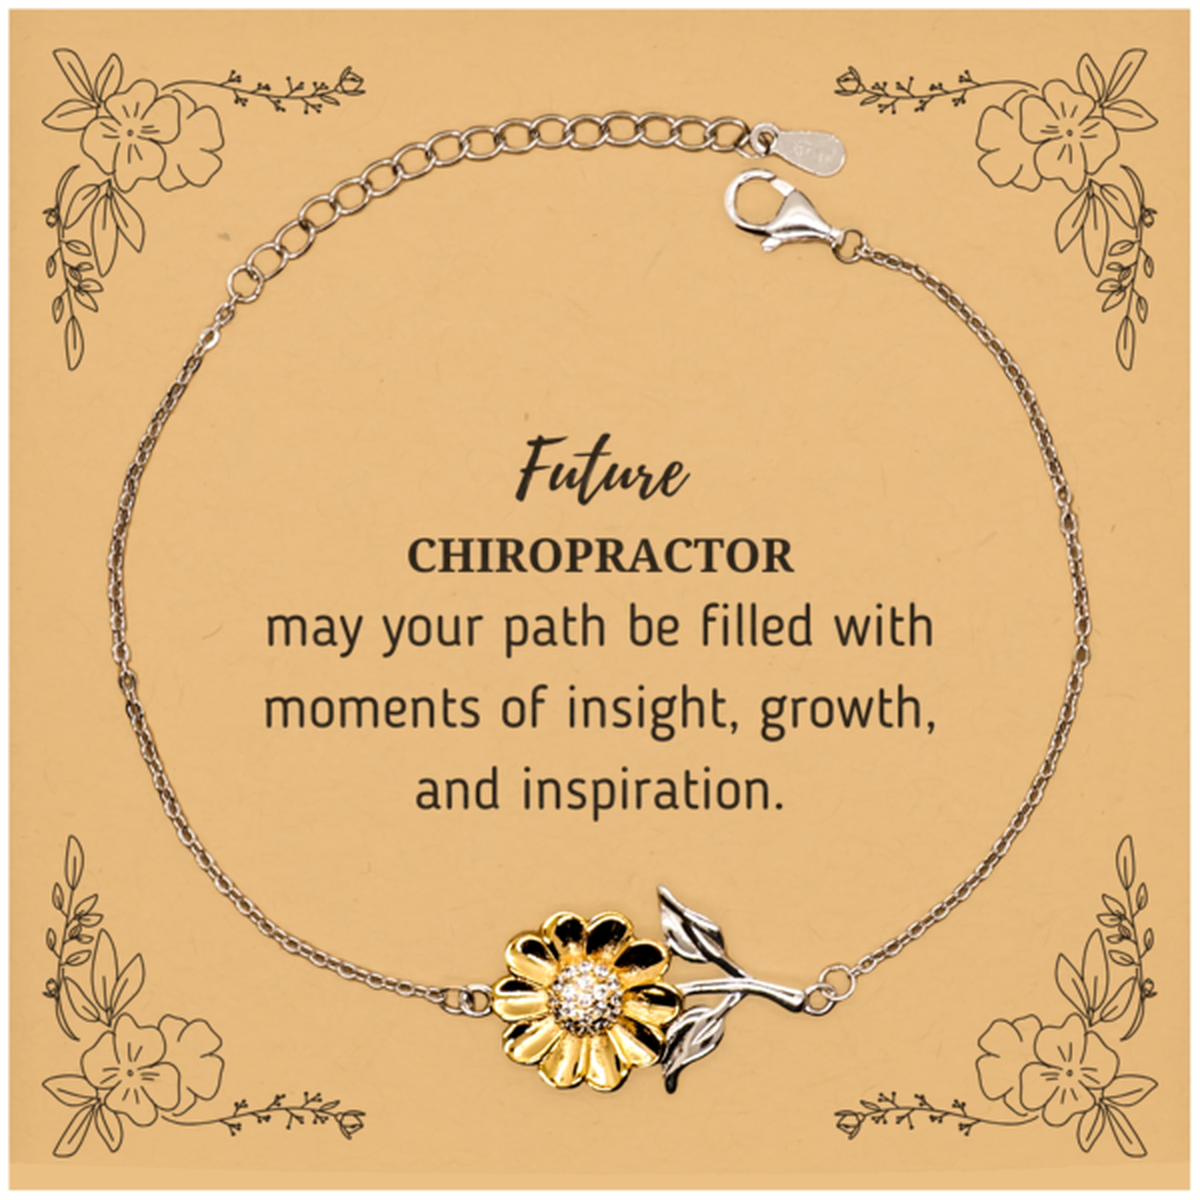 Future Chiropractor Gifts, May your path be filled with moments of insight, Graduation Gifts for New Chiropractor, Christmas Unique Sunflower Bracelet For Men, Women, Friends